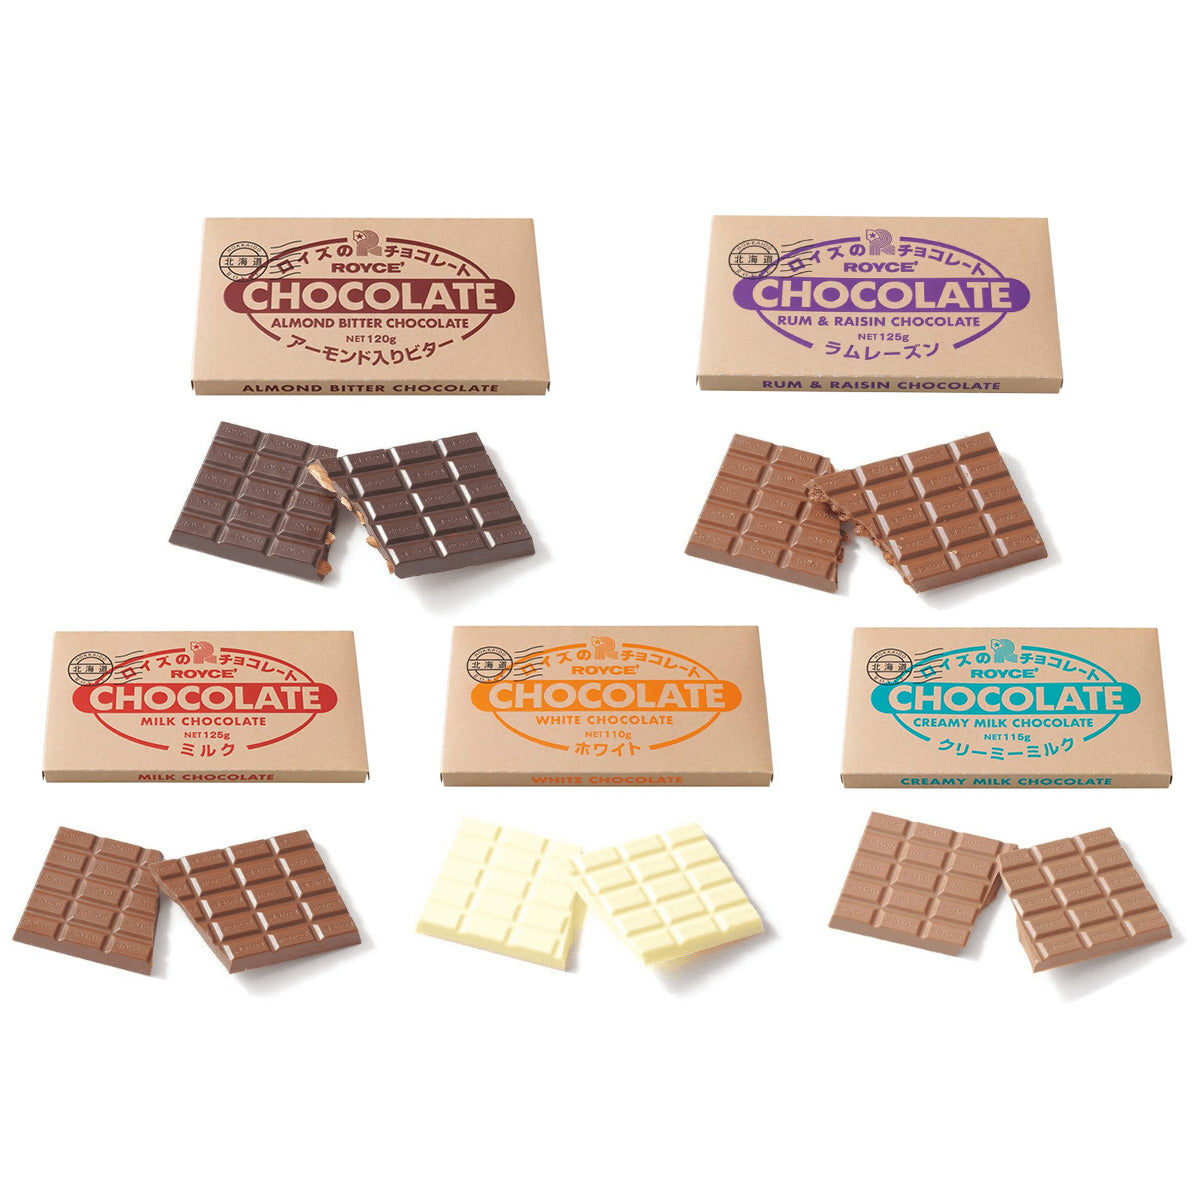 ROYCE' Chocolate - ROYCE' Chocolate Bar Selection - Image shows a collage of chocolate bars. Top from left to right: ROYCE' Chocolate Almond Bitter Chocolate and brown chocolate bars with almonds; and ROYCE' Chocolate Rum & Raisin Chocolate and brown chocolate bars with raisins. Below from left to right: ROYCE' Chocolate Milk Chocolate and brown chocolate bars; ROYCE' Chocolate White Chocolate and white chocolate bars; and ROYCE' Chocolate Creamy Milk Chocolate and brown chocolate bars.